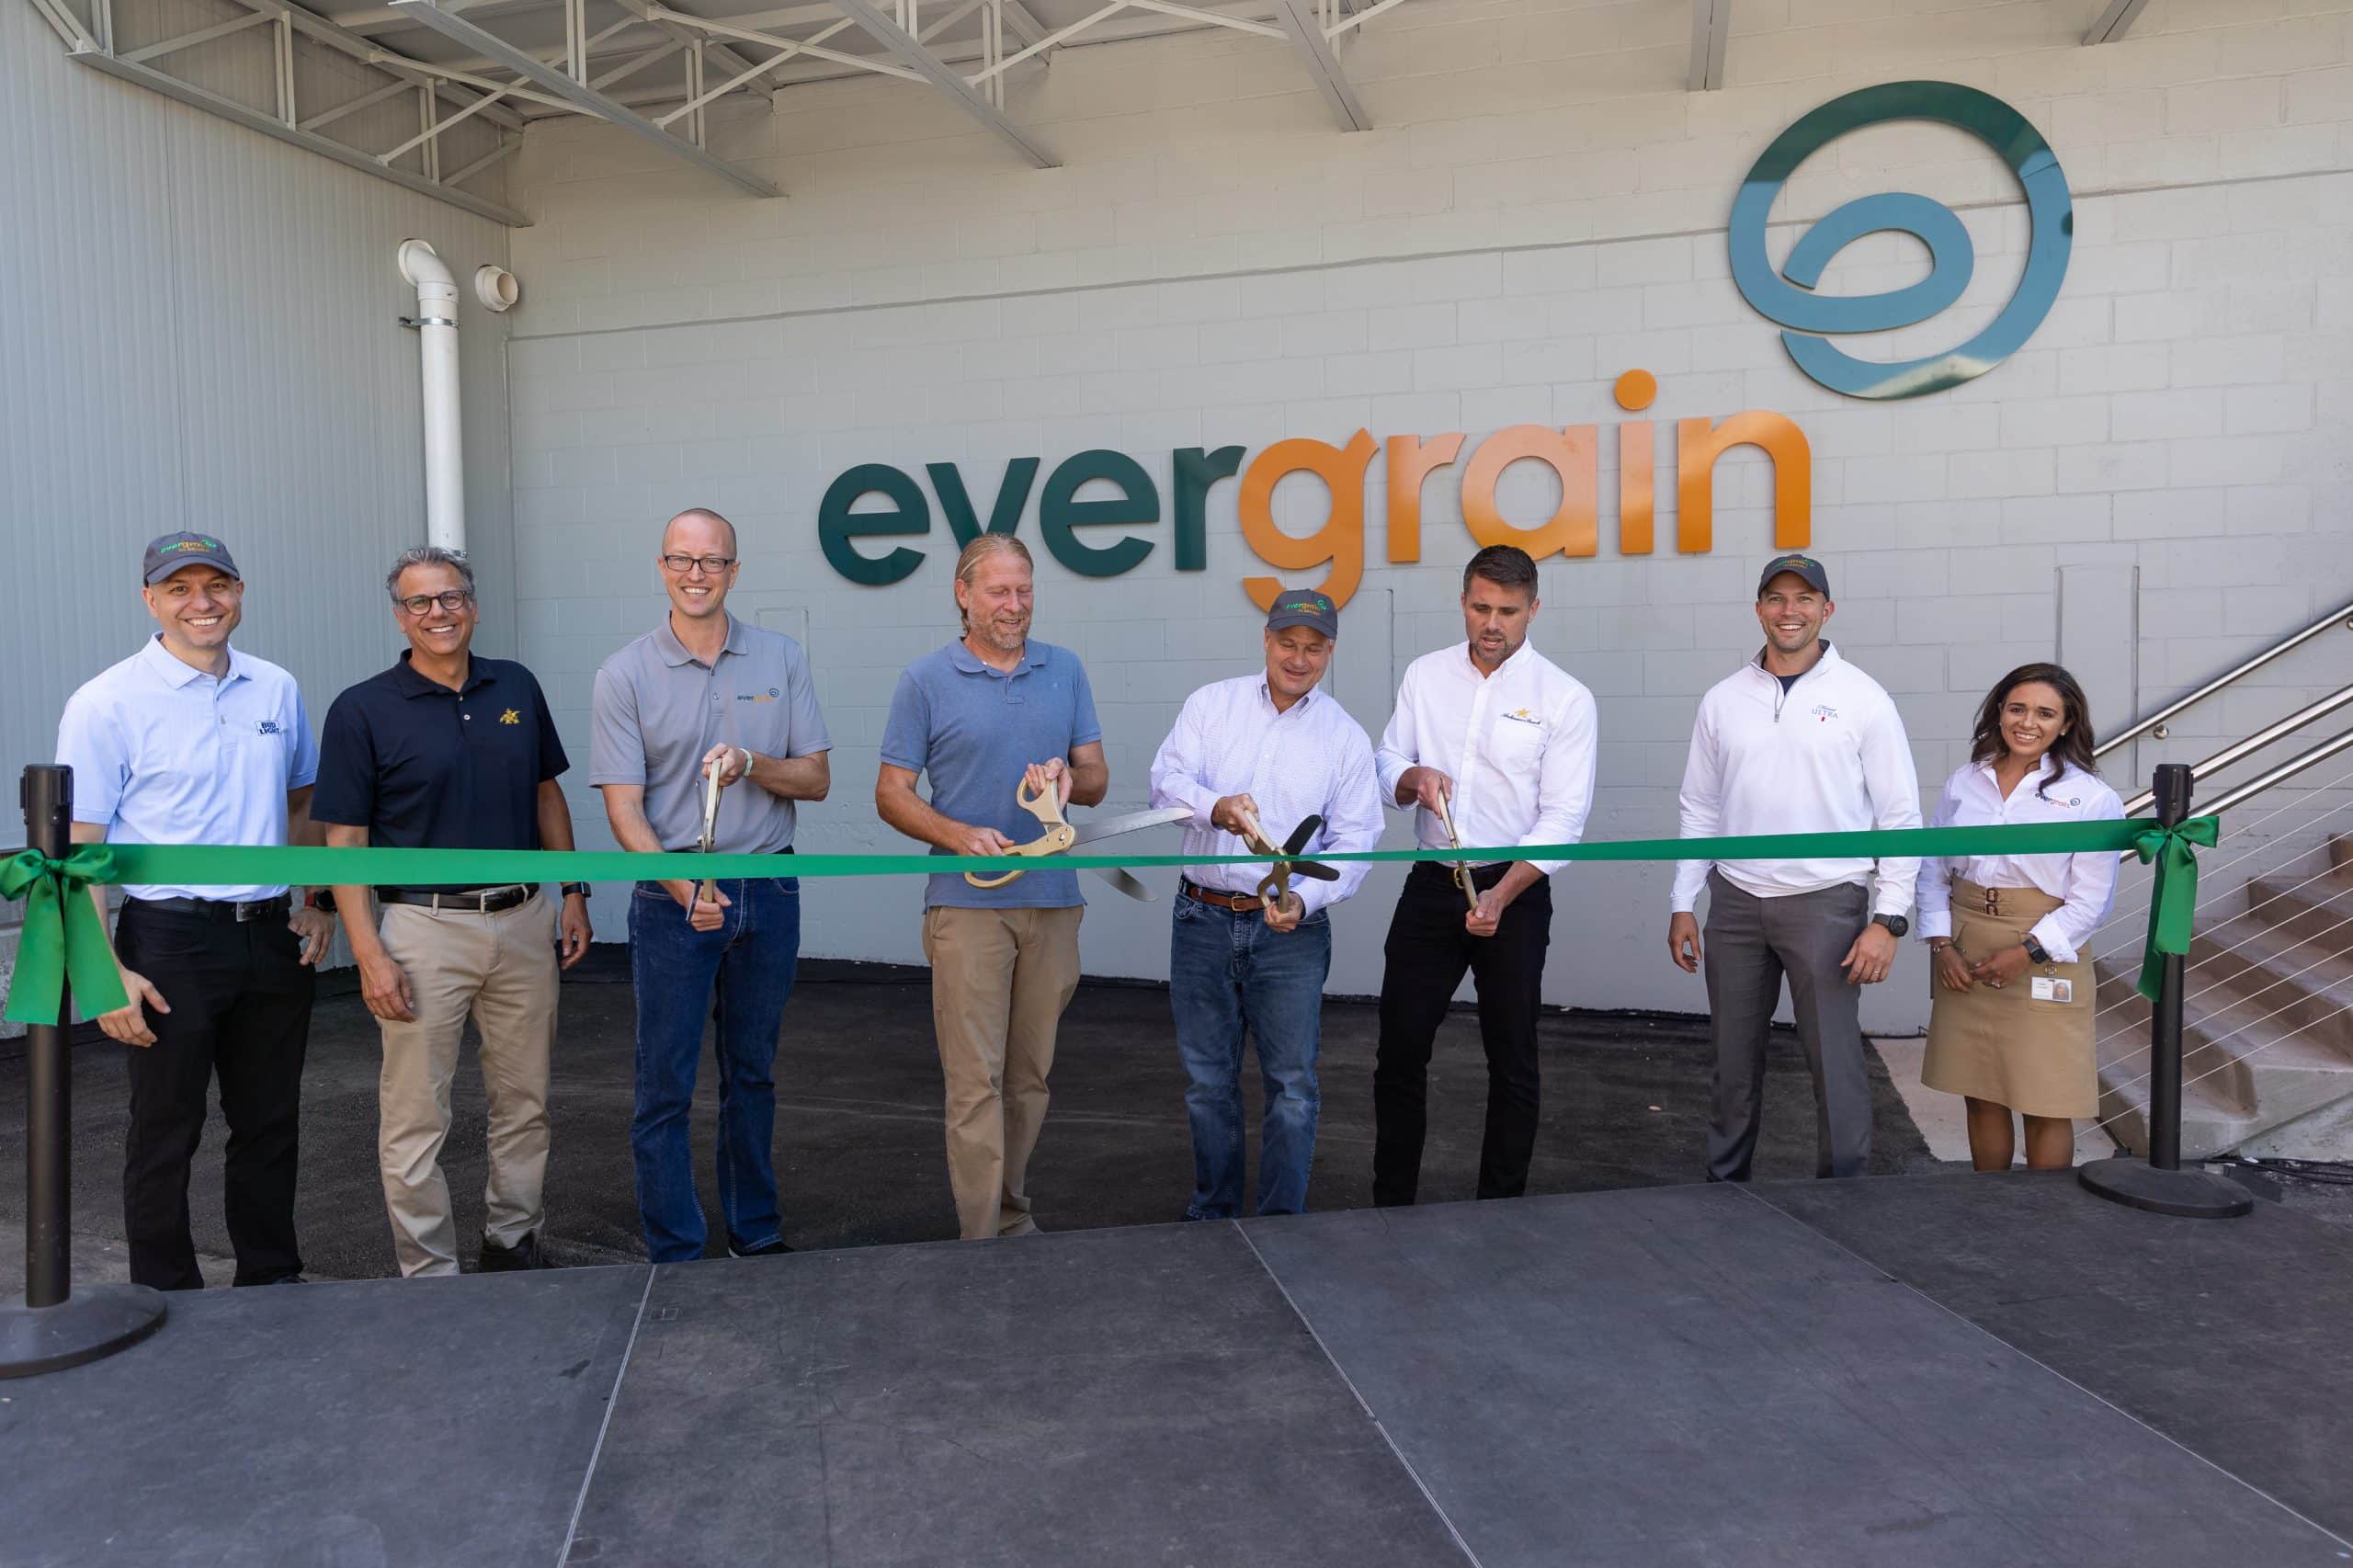 EverGrain and Anheuser-Busch Celebrate Opening of the First Major Site of U.S. Operations